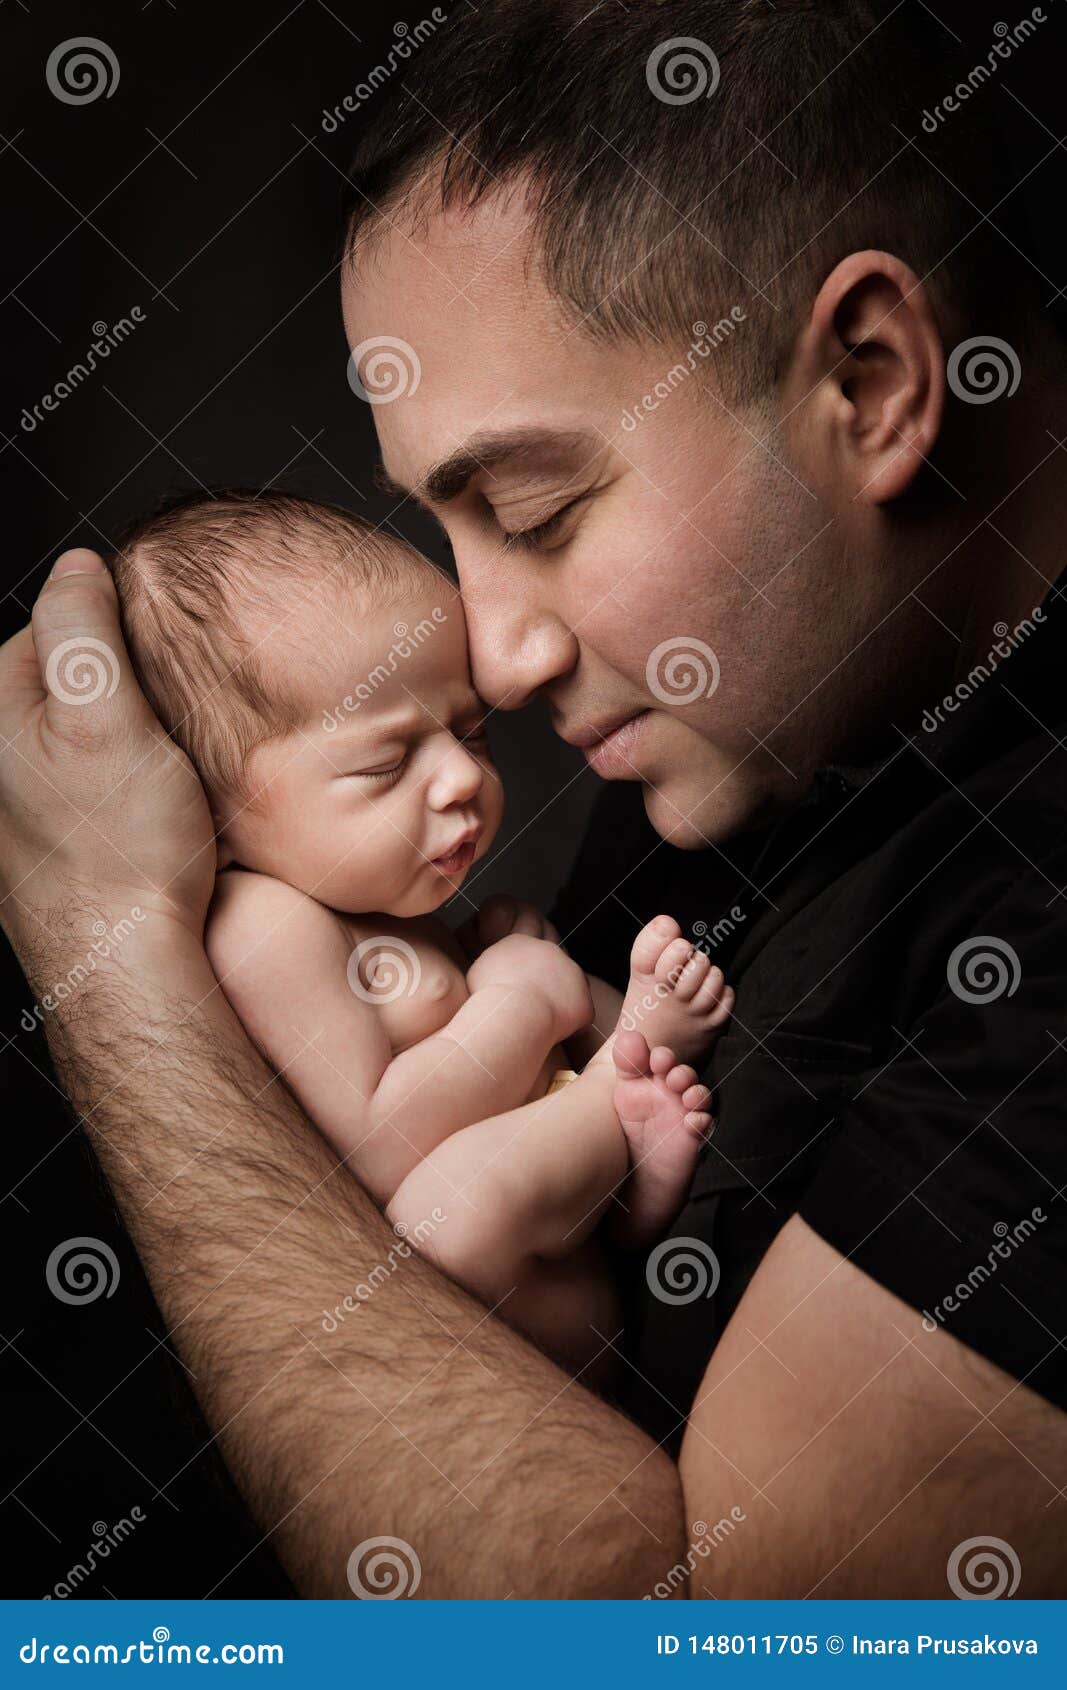 newborn baby and father portrait, man holding new born kid on hands, parents care